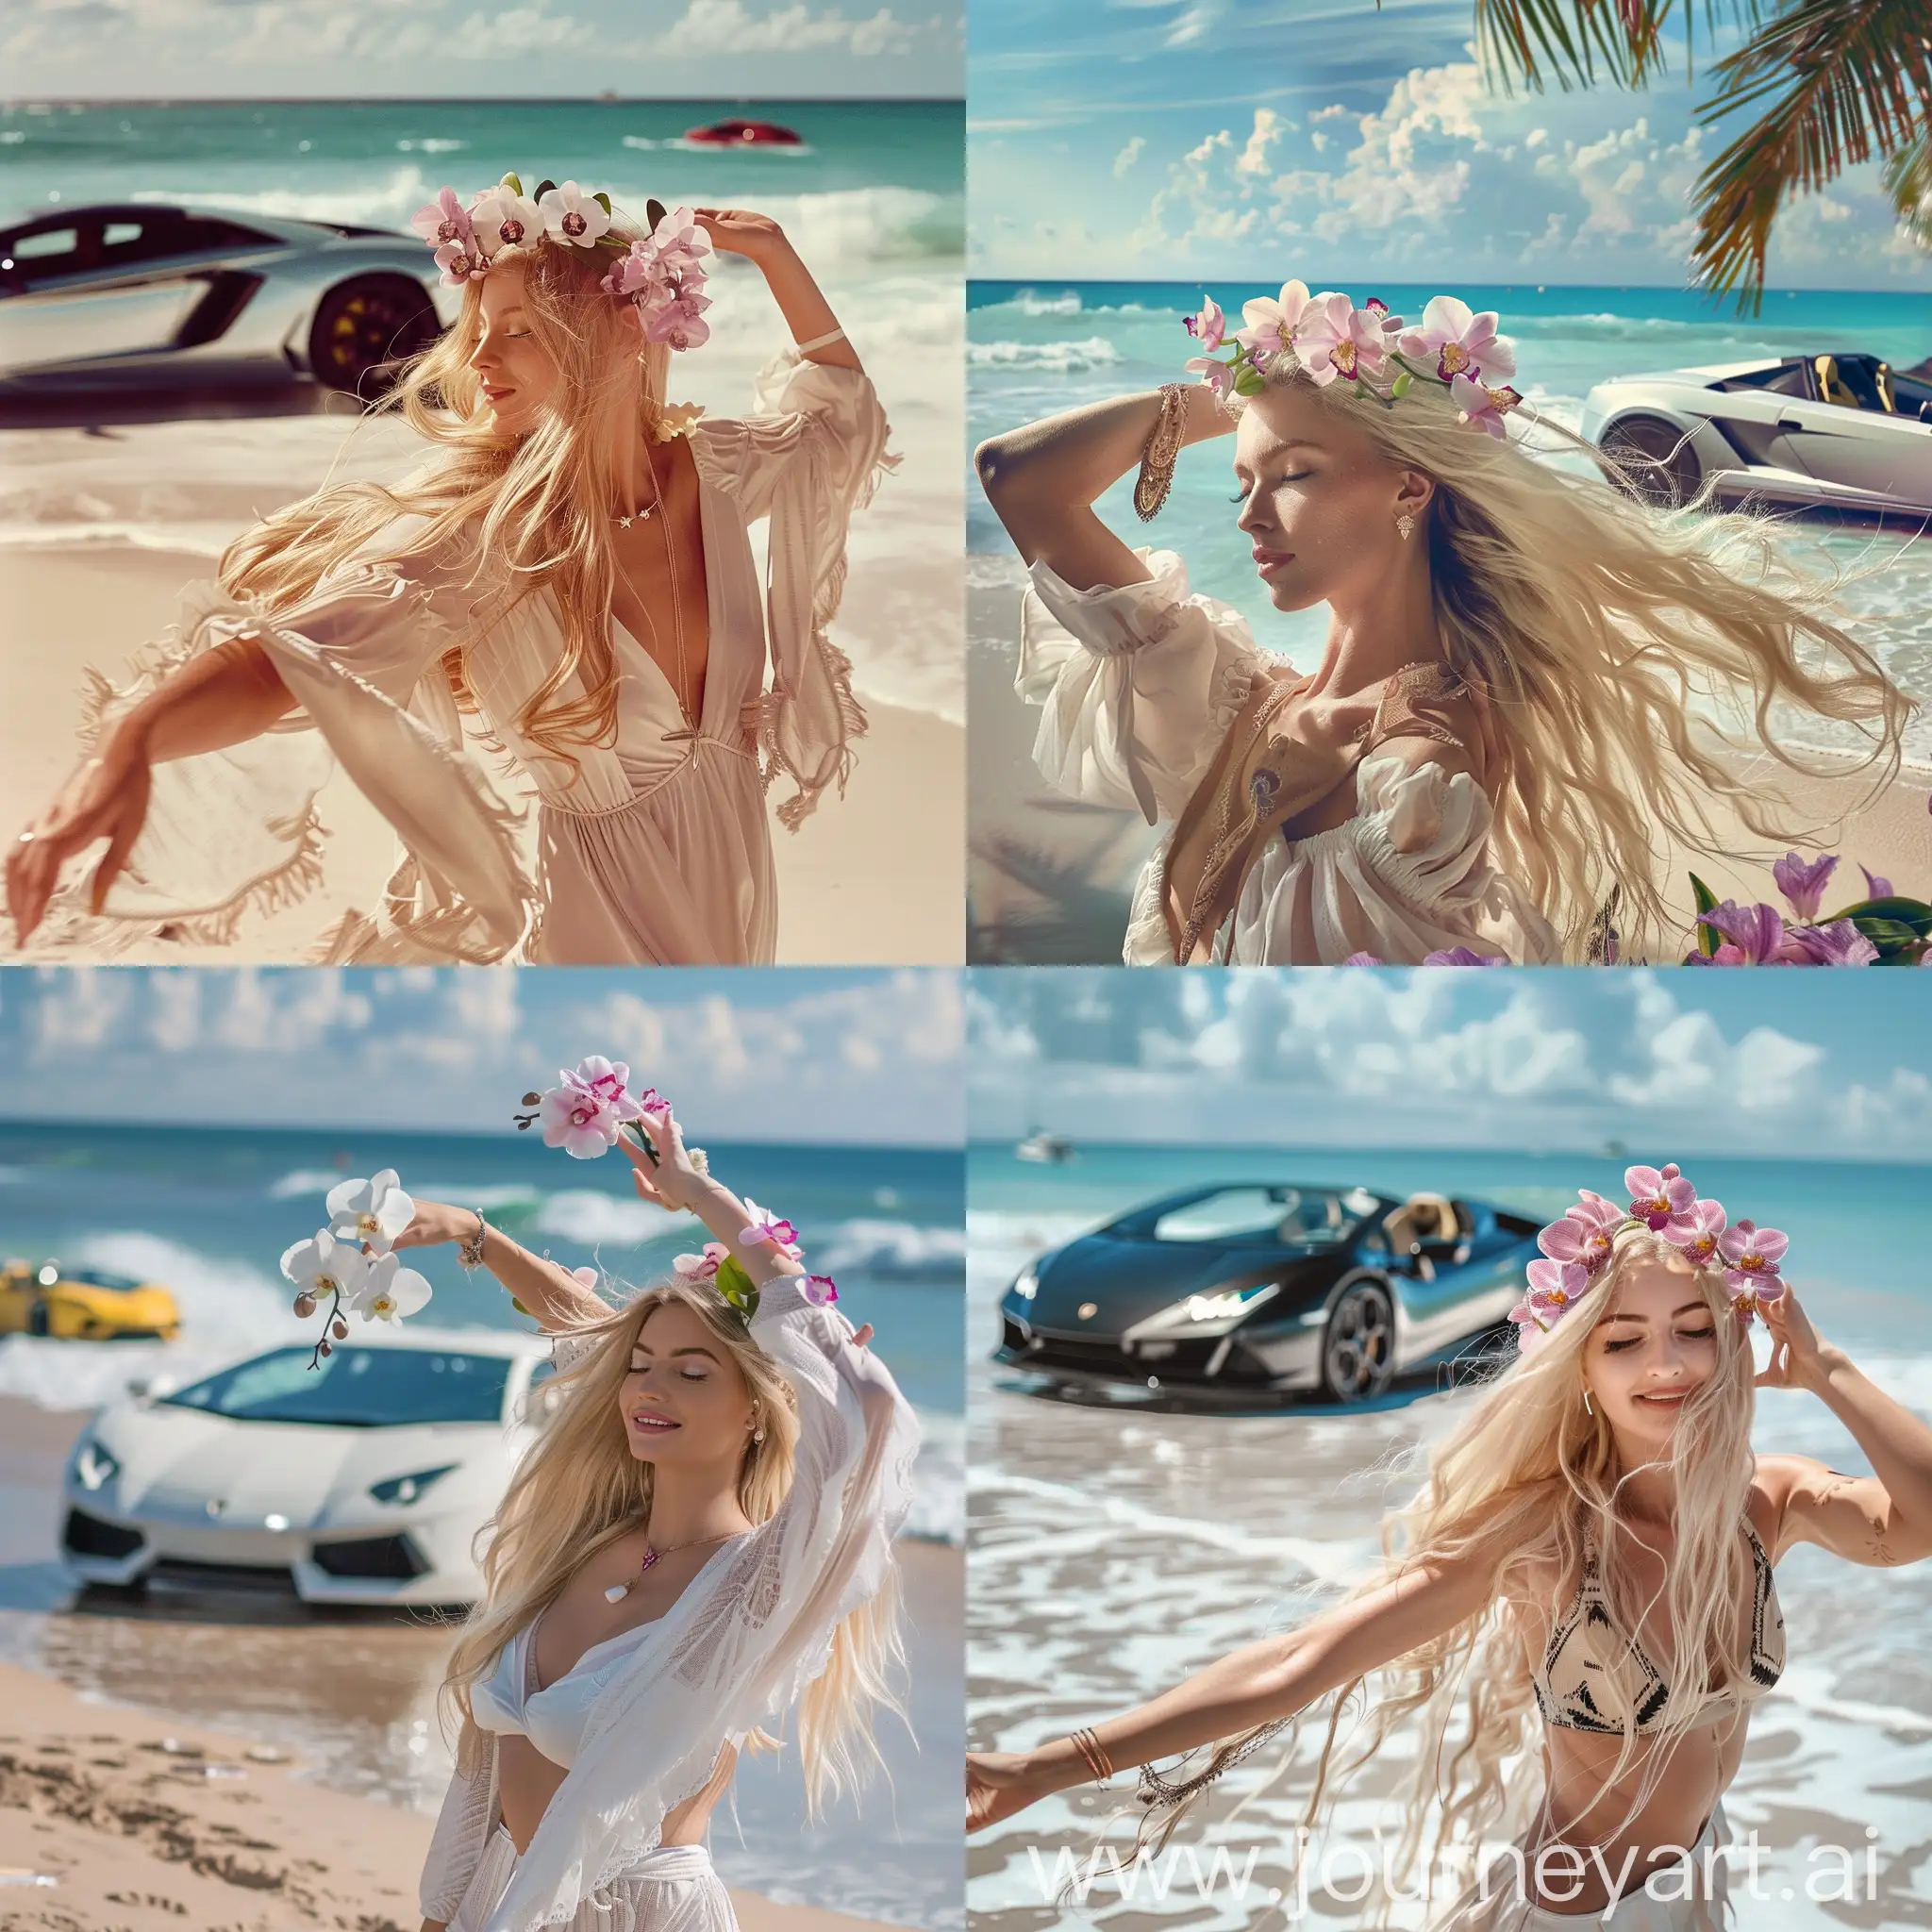 Blonde girl with orchids and orchids in her hair dances on the beach, Lambo car on background